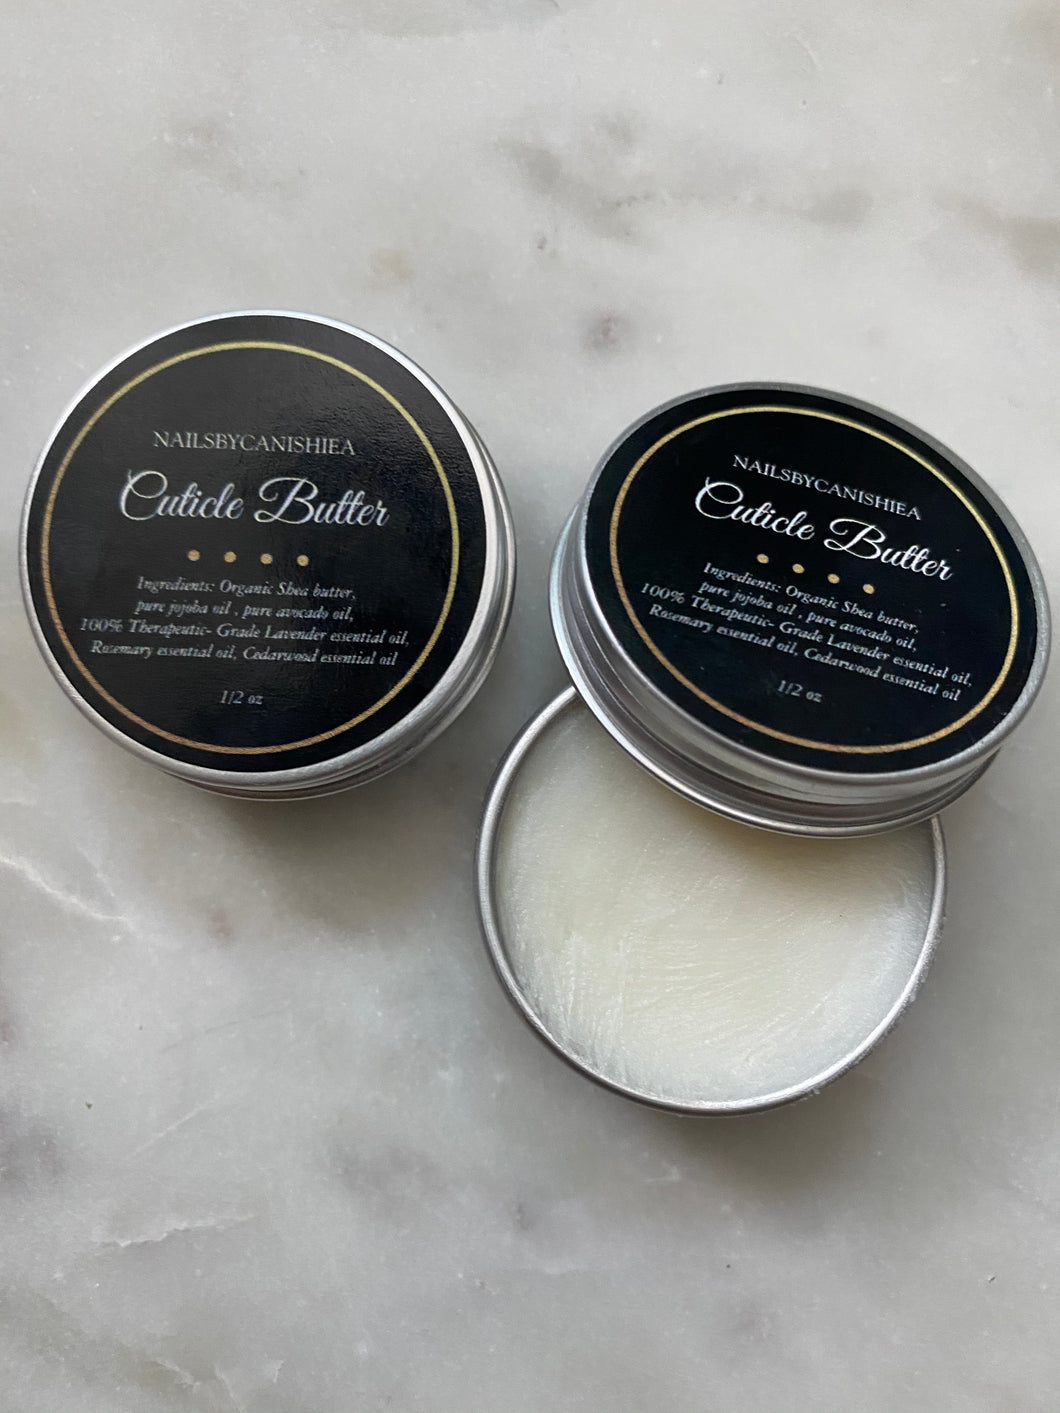 Cuticle butter